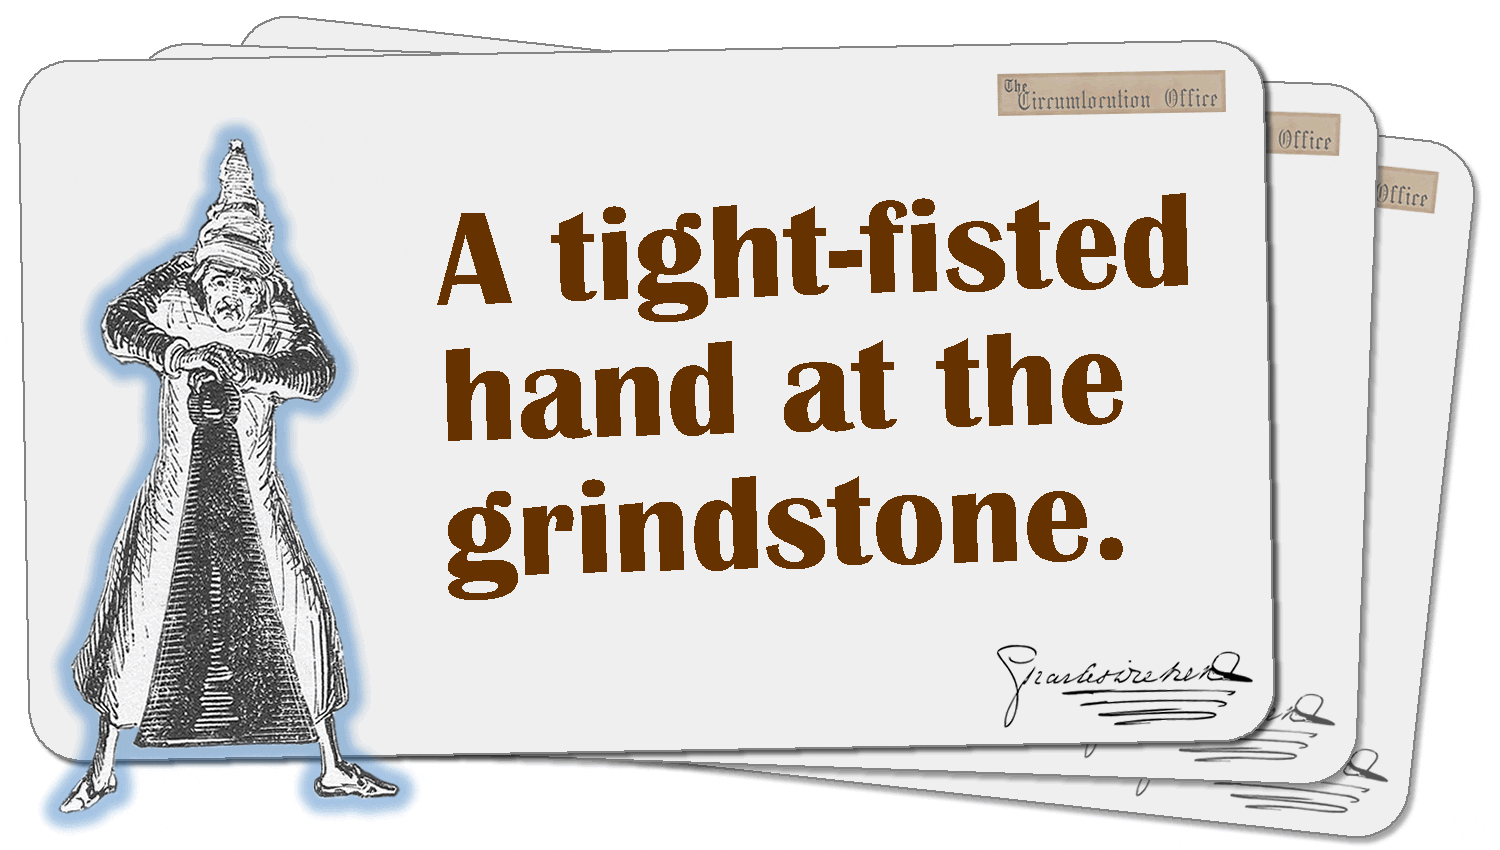 A tight-fisted hand at the grindstone.